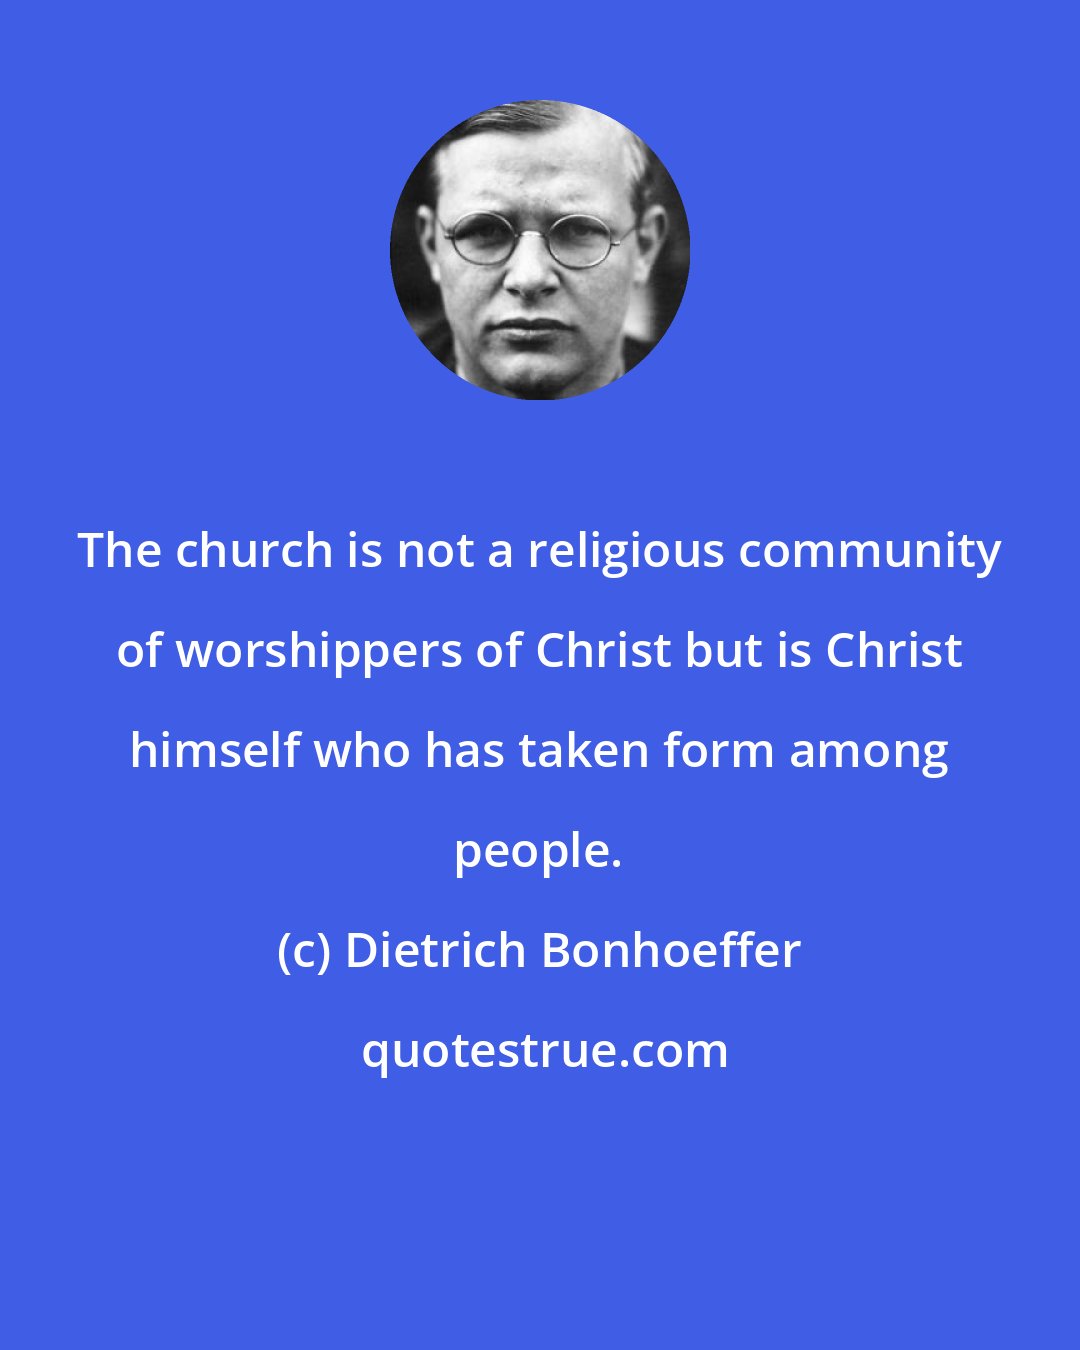 Dietrich Bonhoeffer: The church is not a religious community of worshippers of Christ but is Christ himself who has taken form among people.